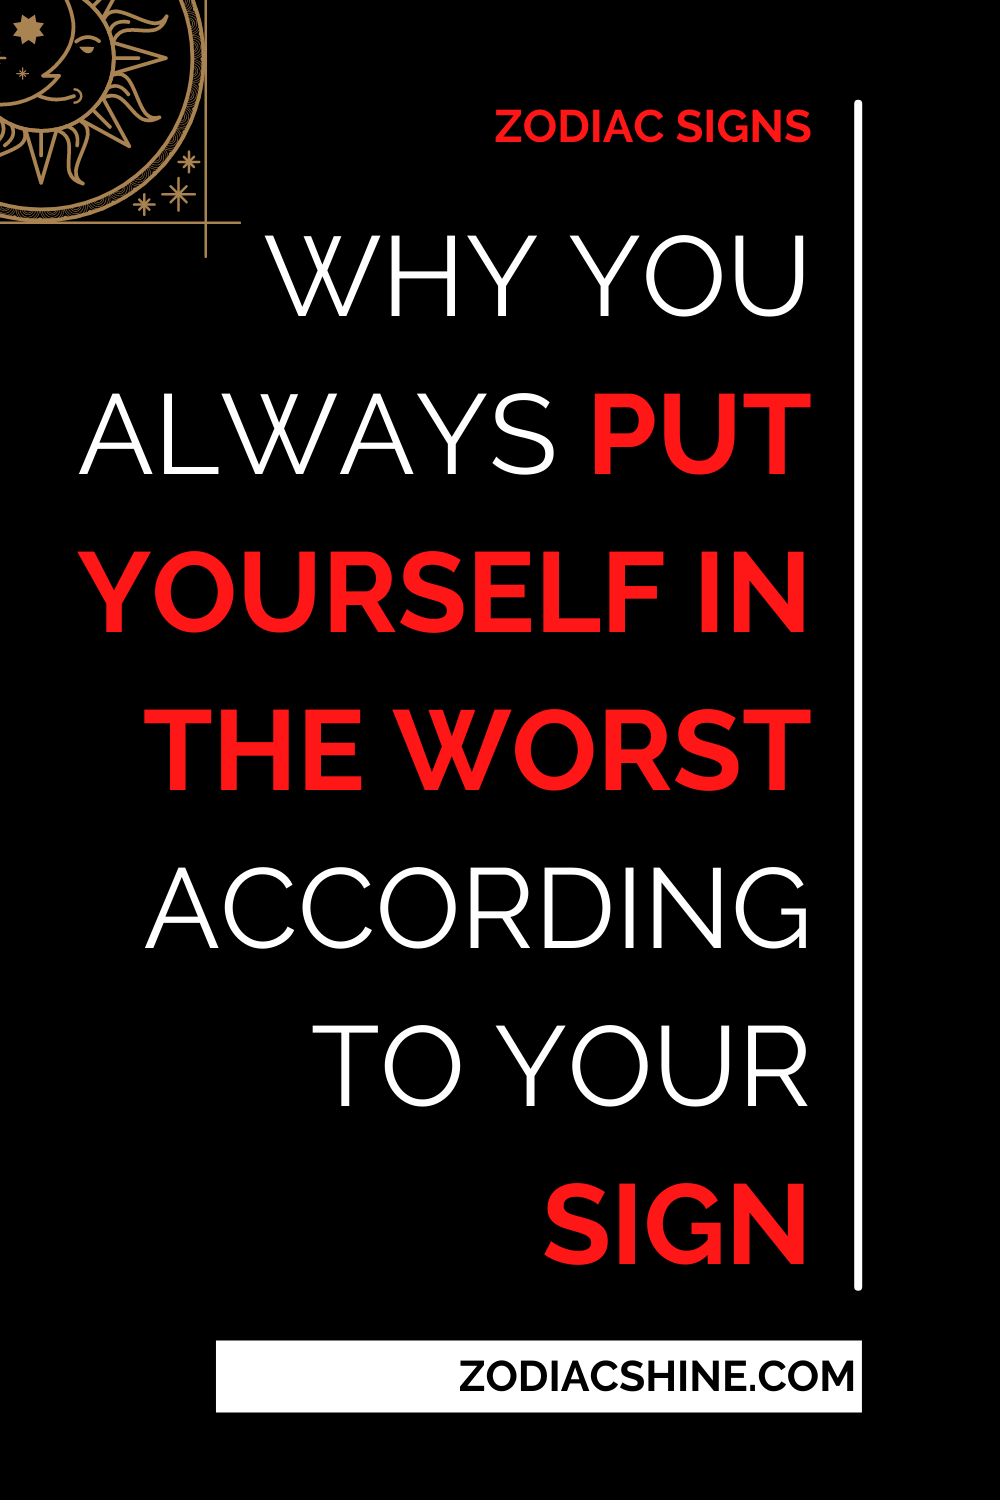 Why You Always Put Yourself In The Worst According To Your Sign